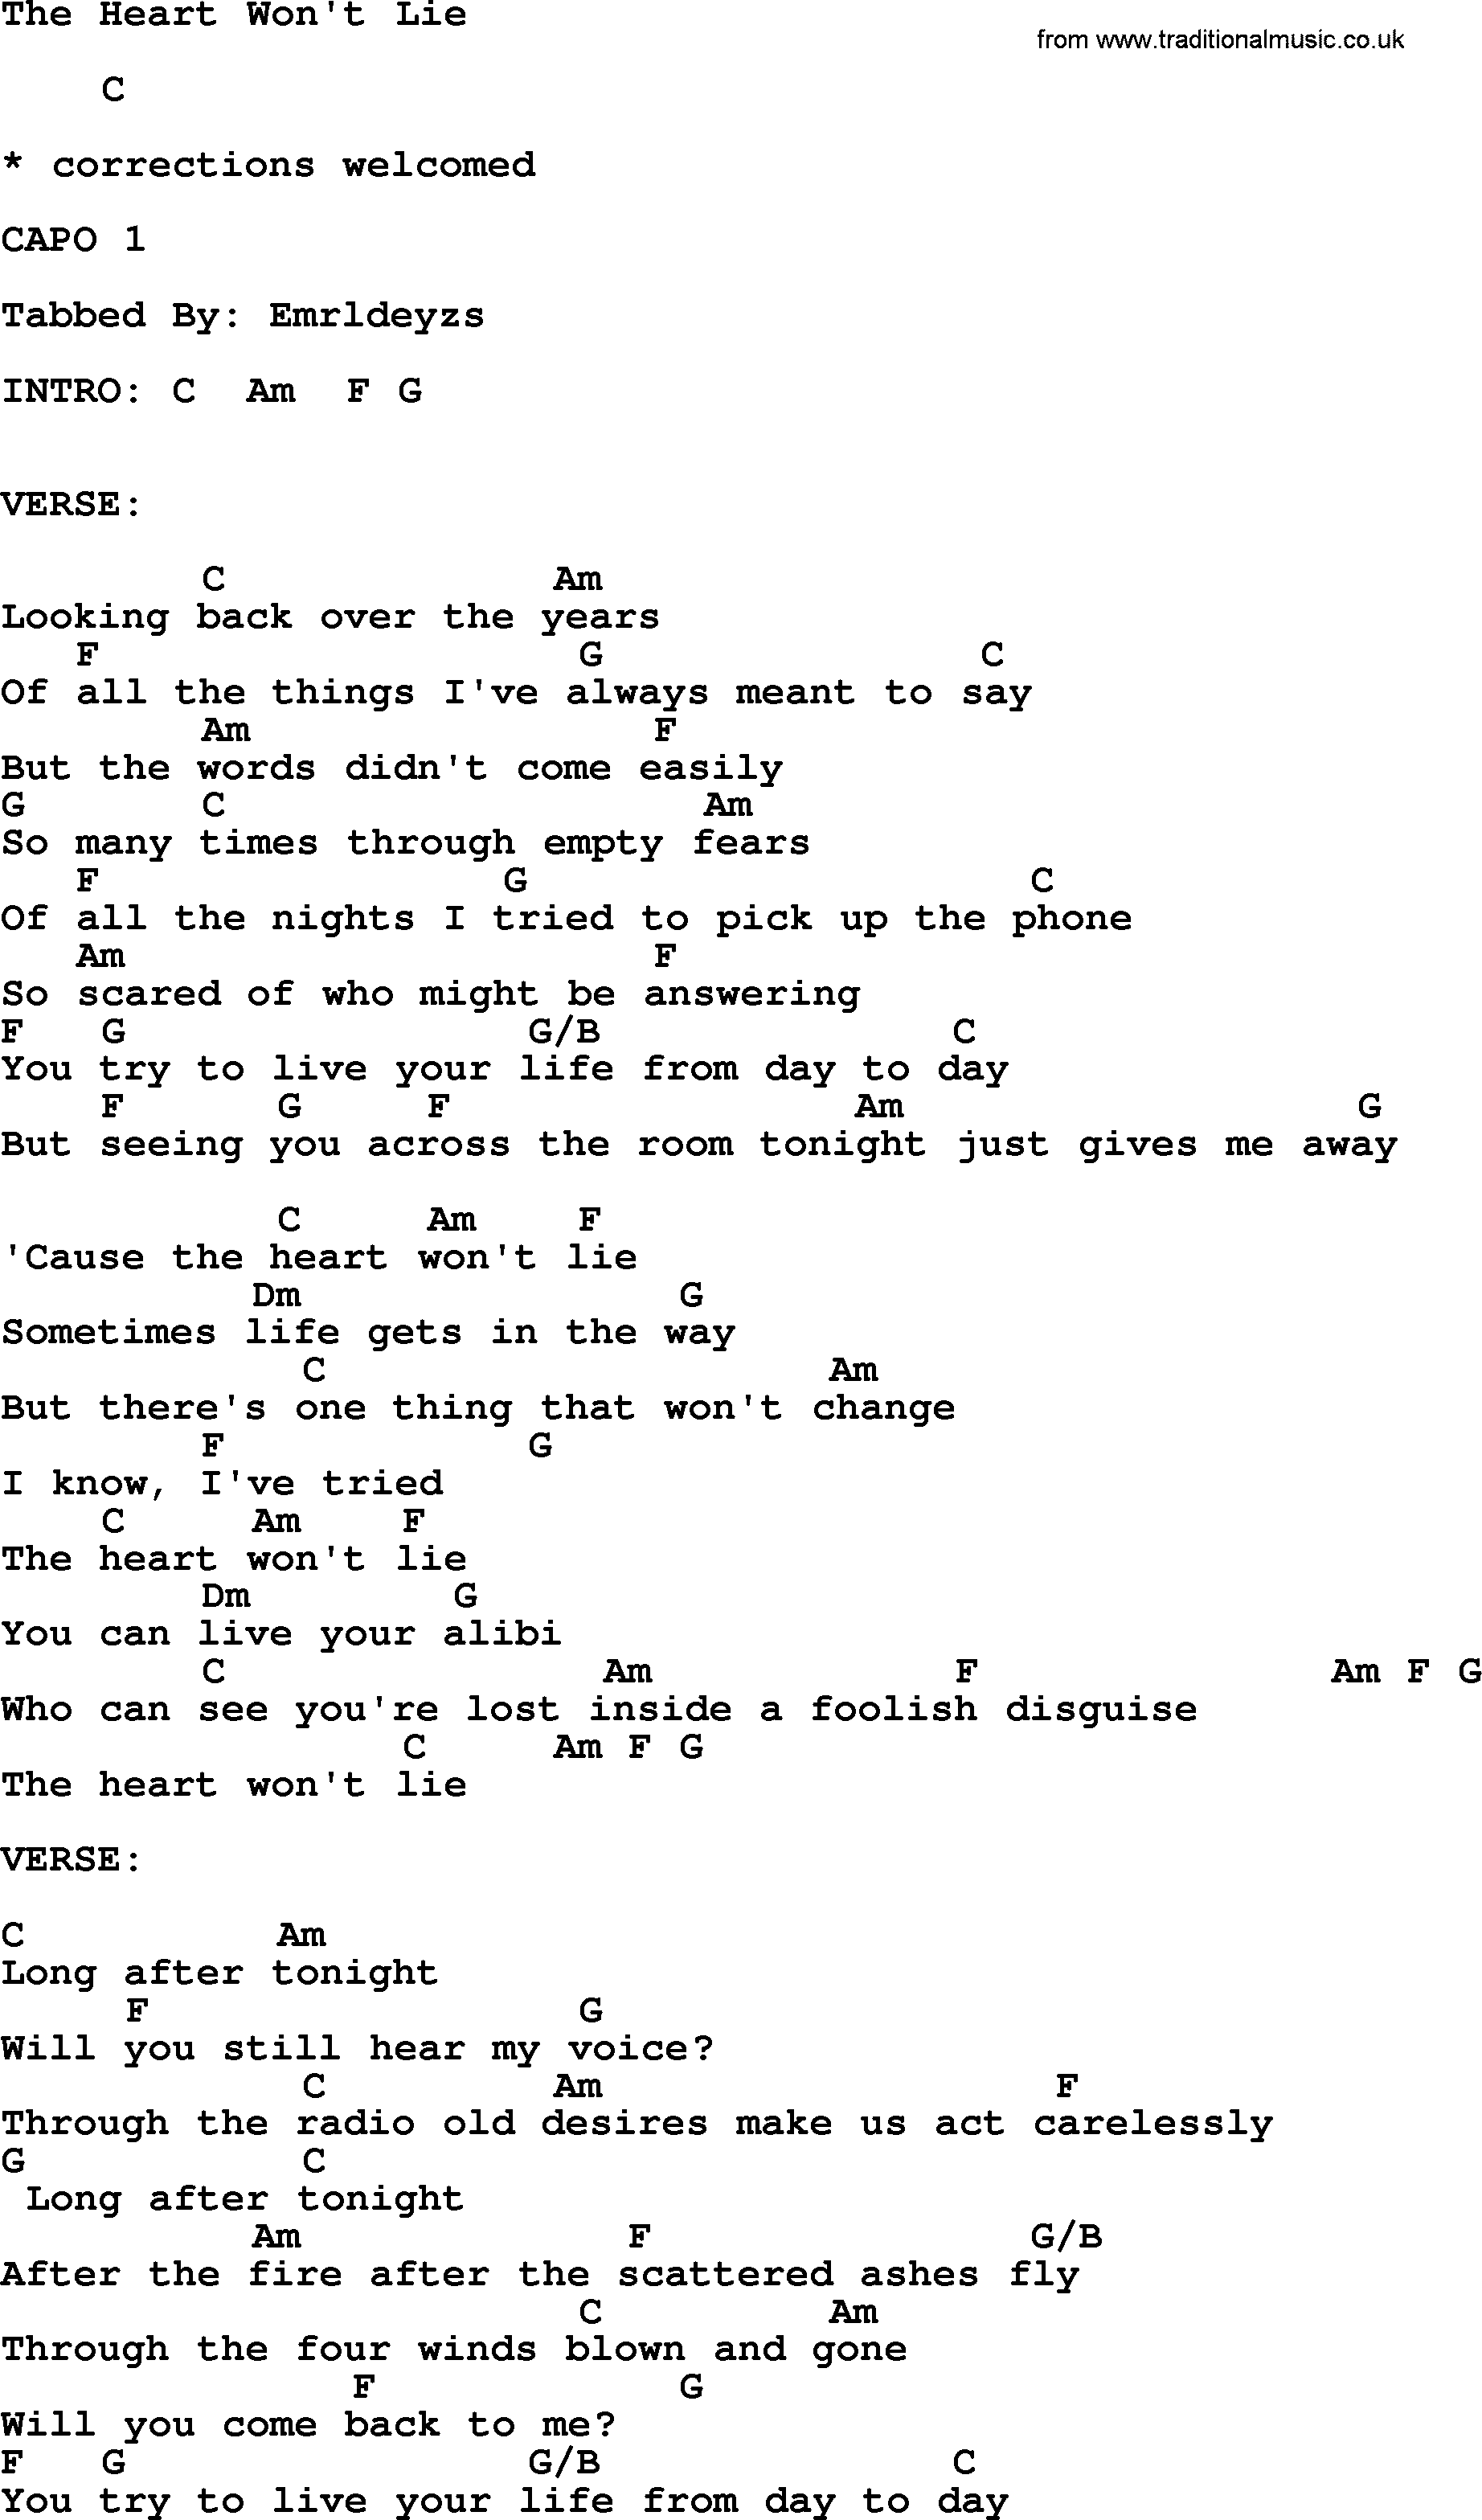 Reba McEntire song: The Heart Won't Lie, lyrics and chords